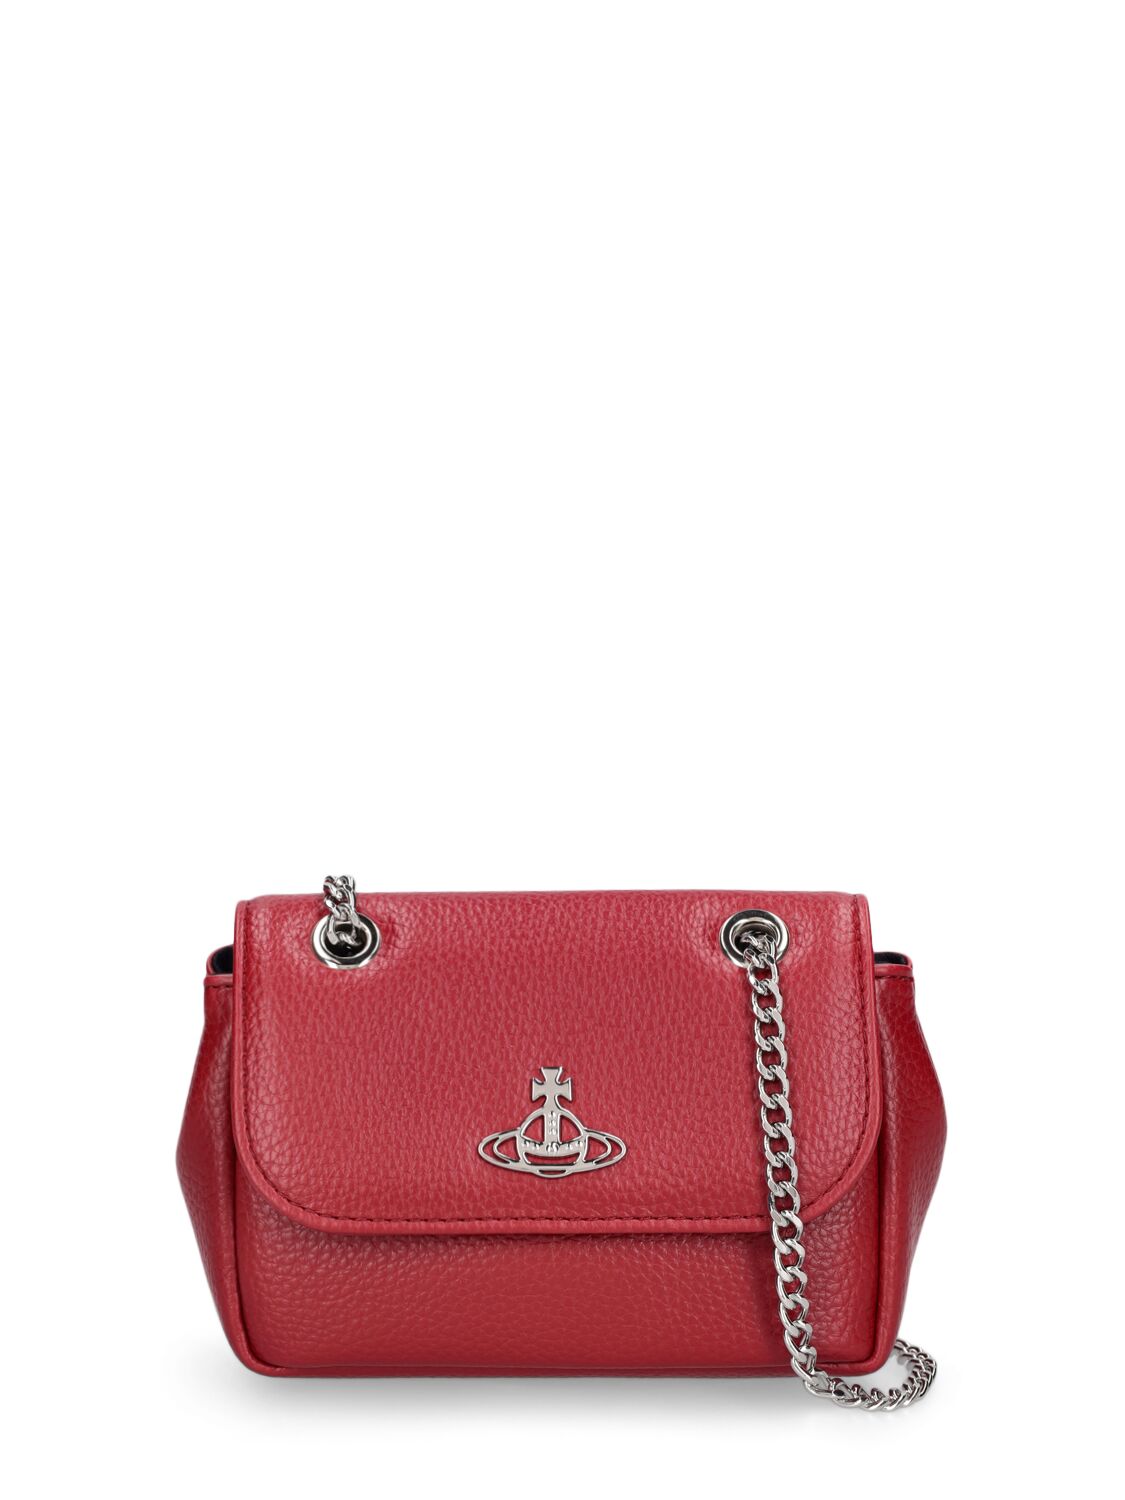 Vivienne Westwood Small Derby Faux Leather Shoulder Bag In Red